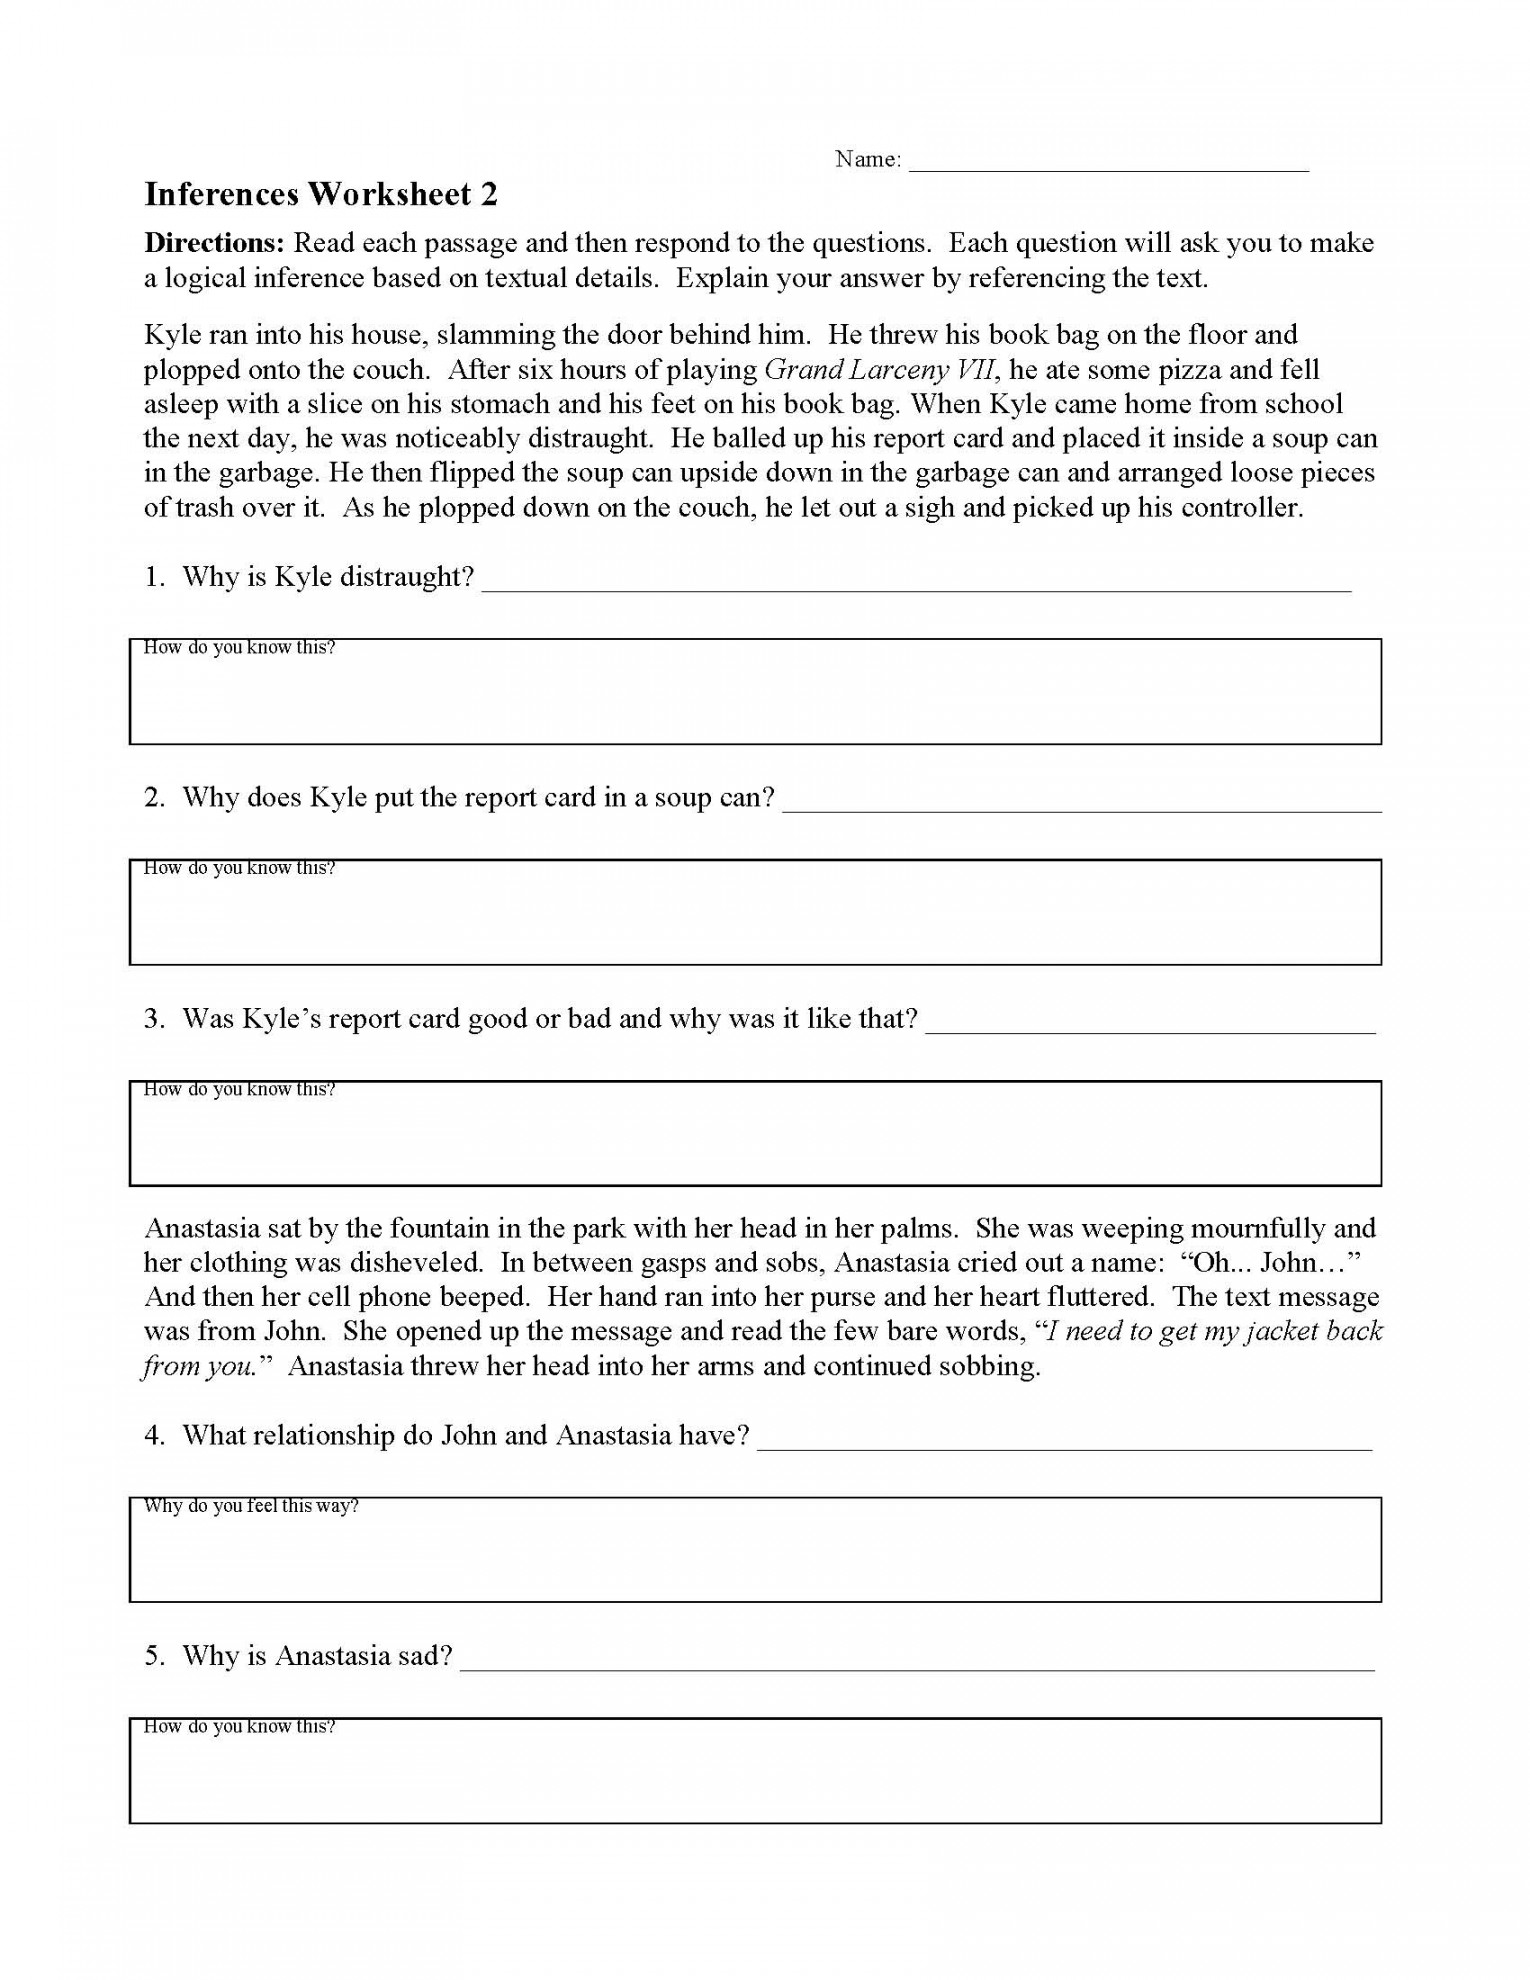 Inferences Worksheets  Reading Activities